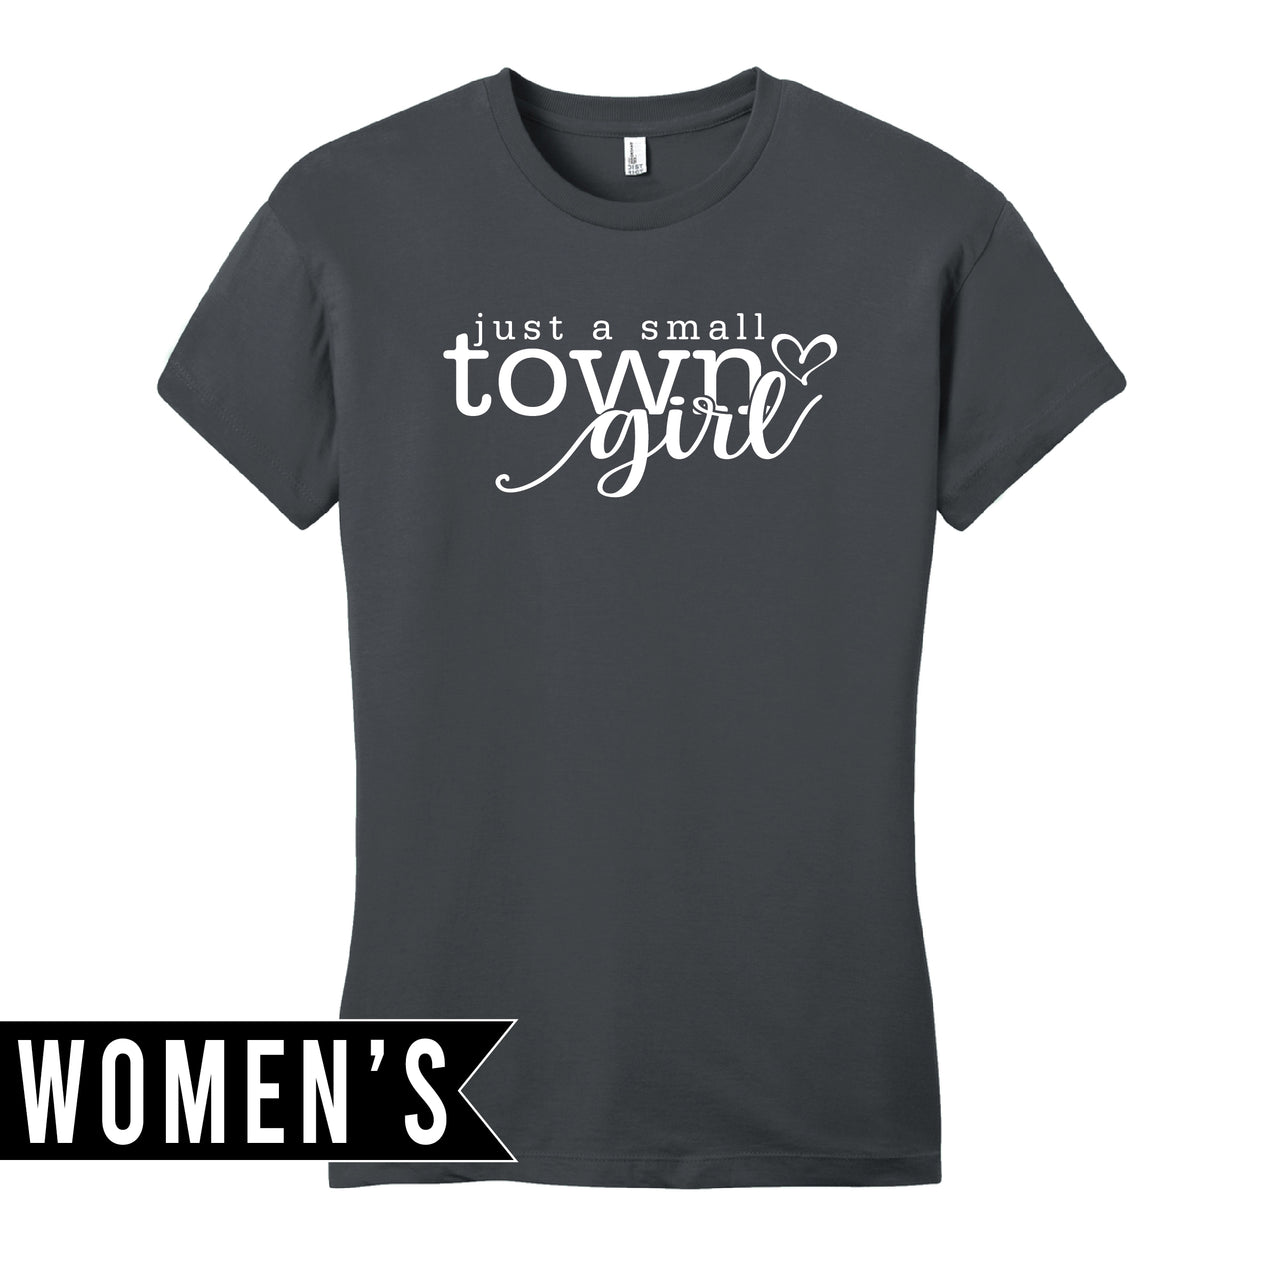 Women’s Fitted T-Shirt - Indiana Small Town